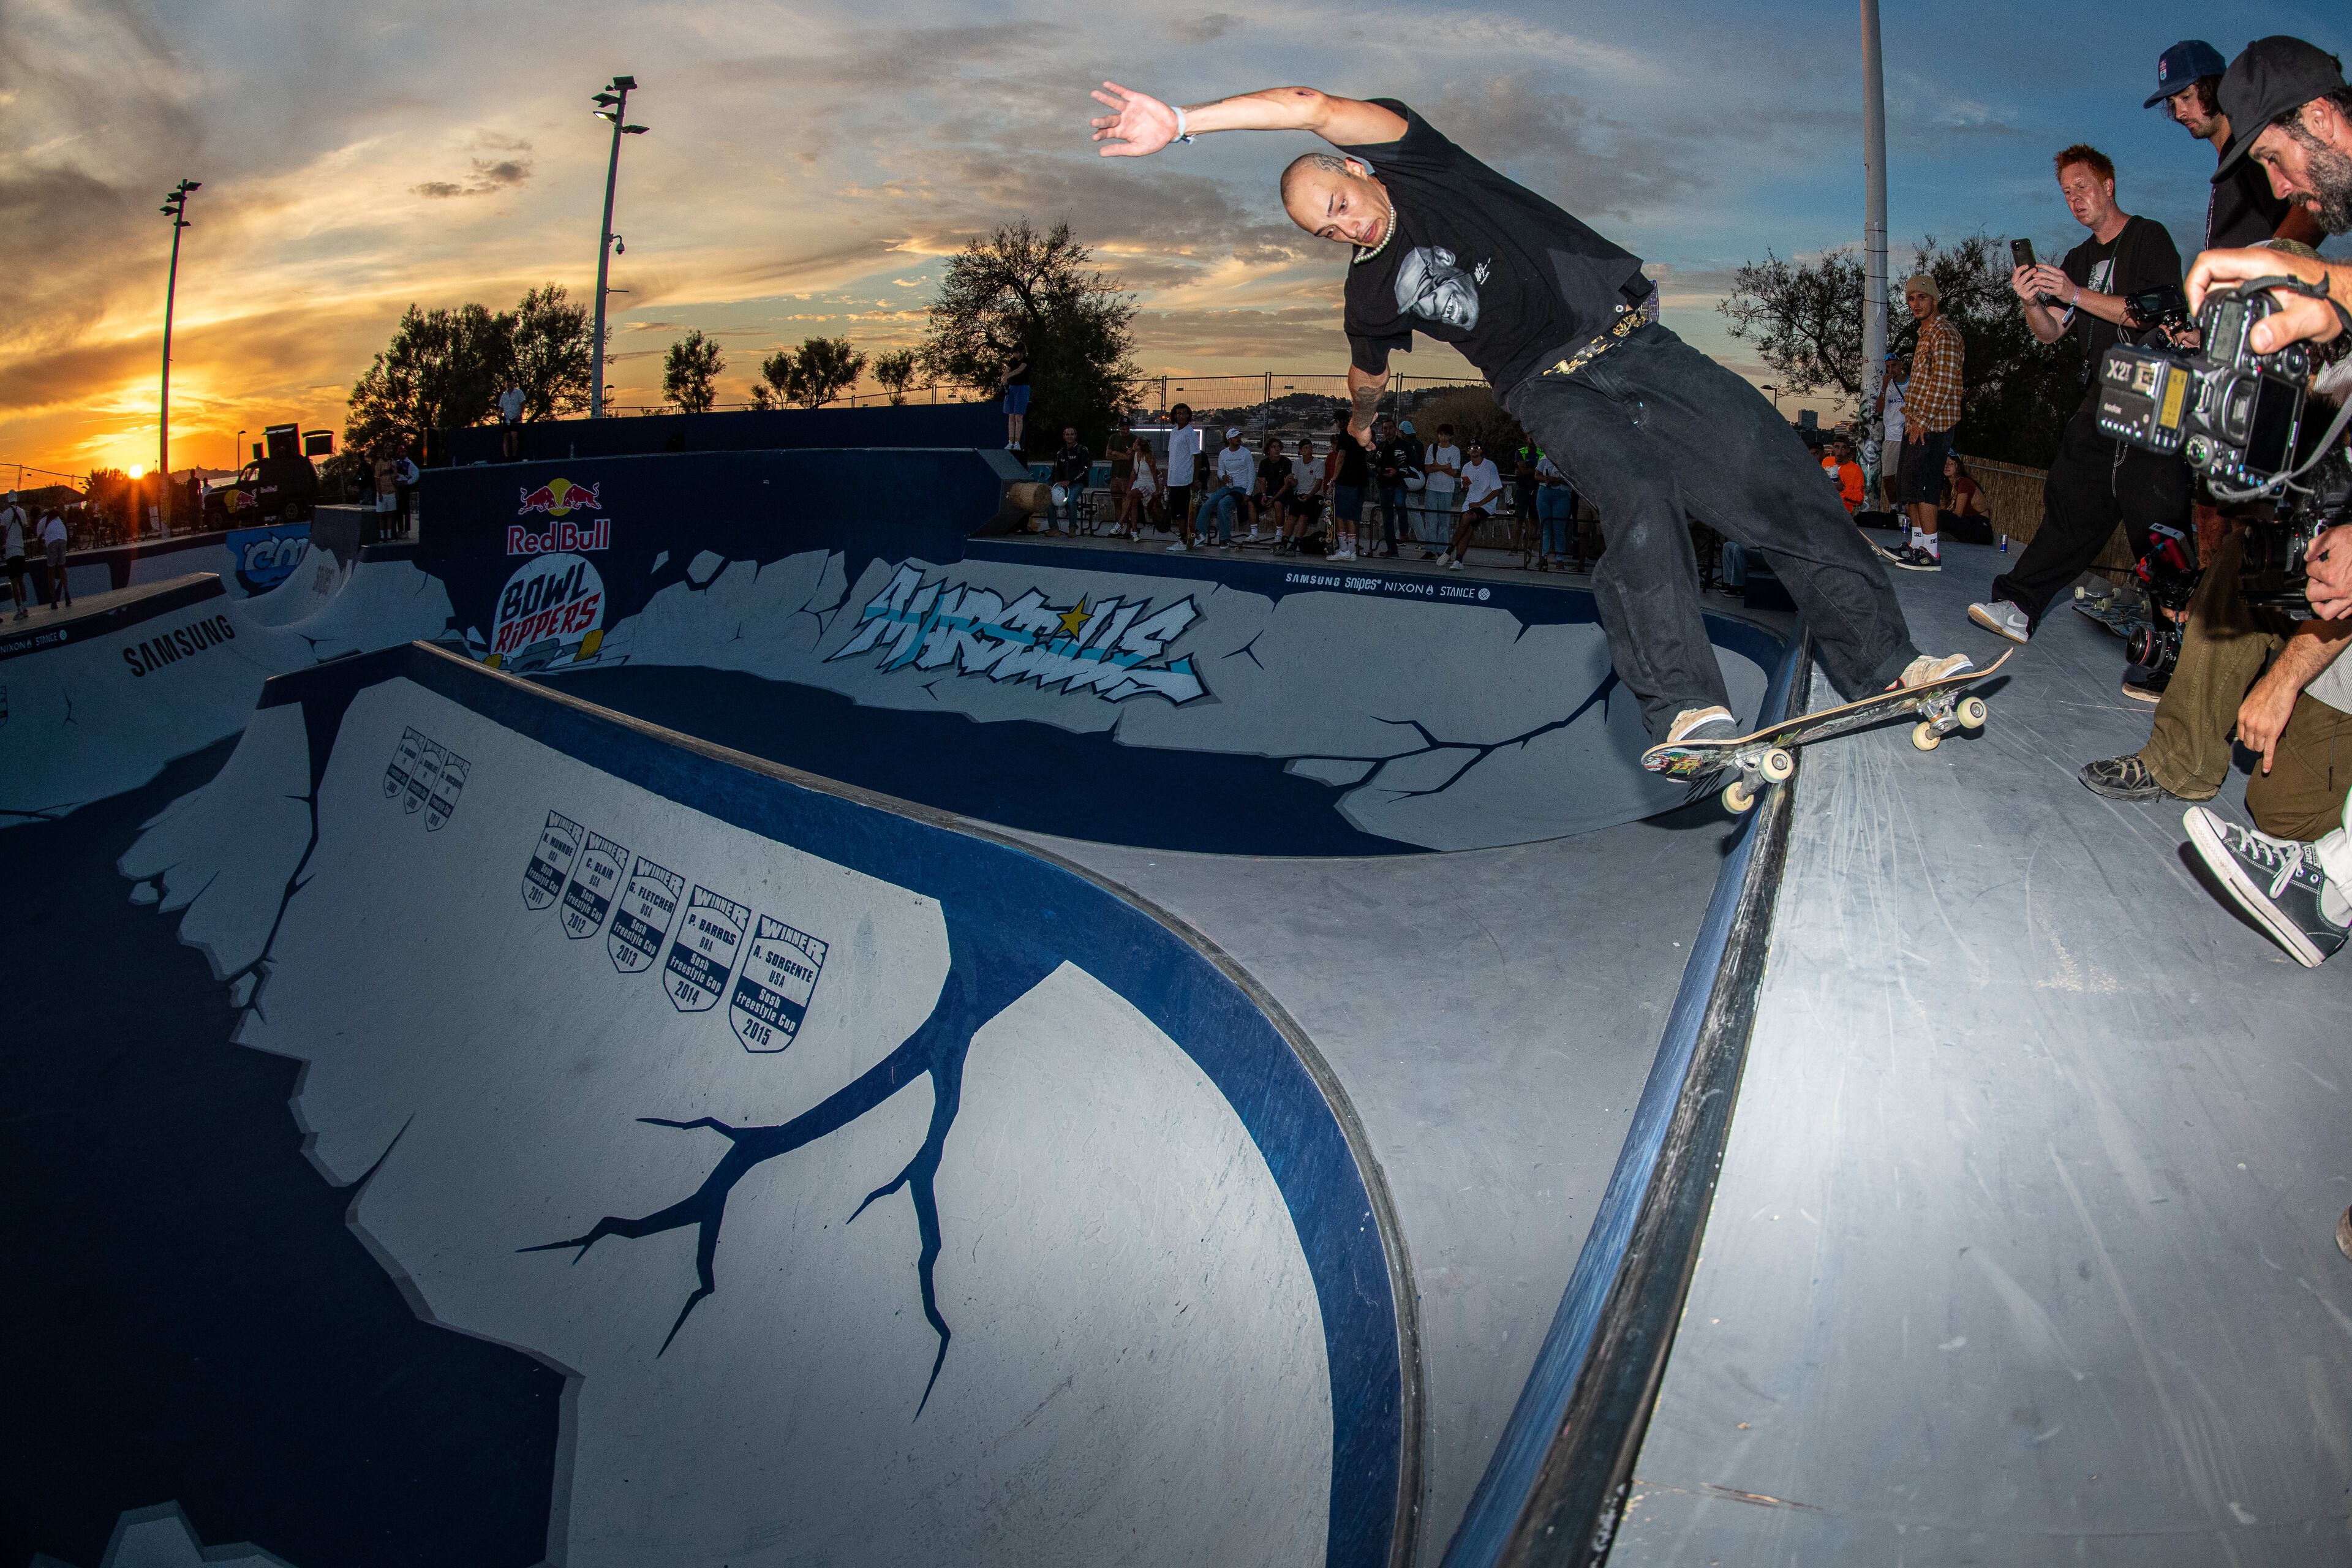 Red Bull Skim It returns with a skate-inspired format